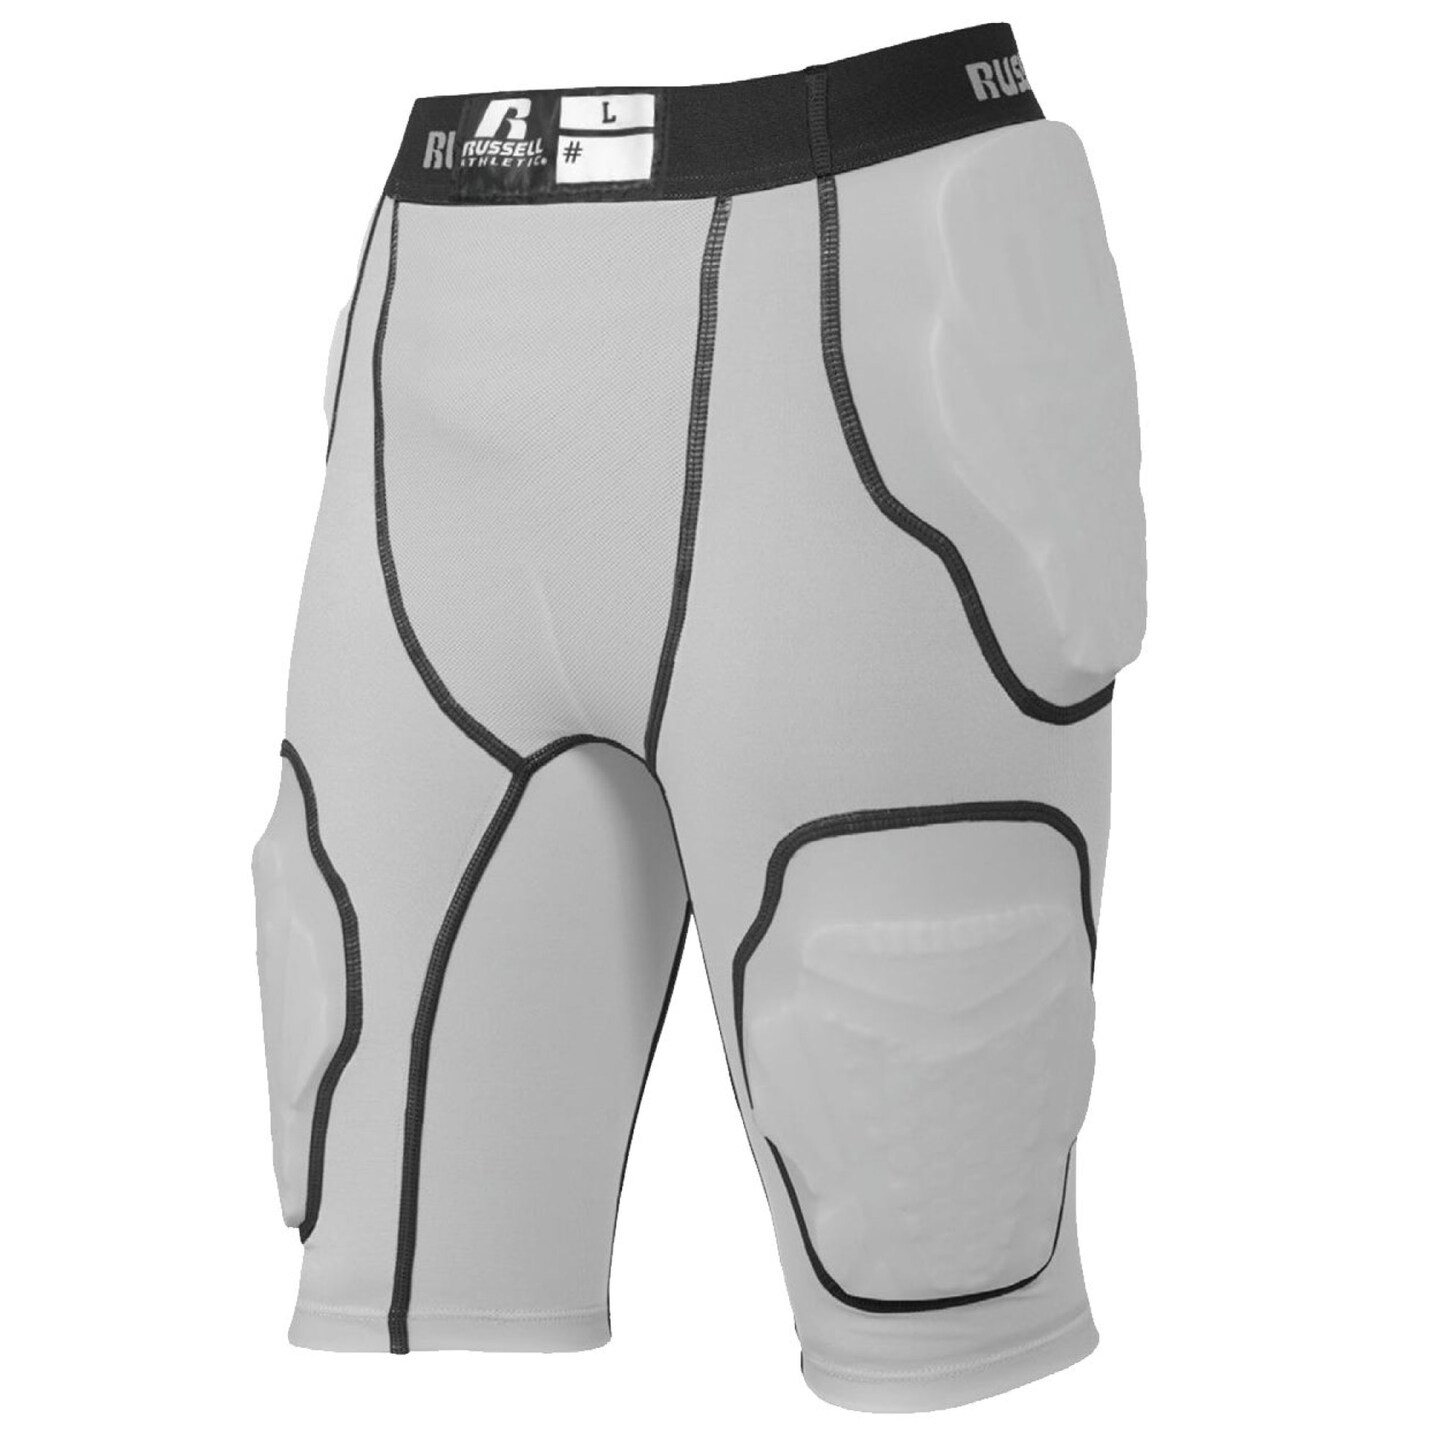 Russell Athletic® - Youth Integrated Girdle, 82/18 polyester/spandex -  RYIGR4, Optimize your athletic performance with fitness-focused,  comfortable athletic wear designed for optimal mobility